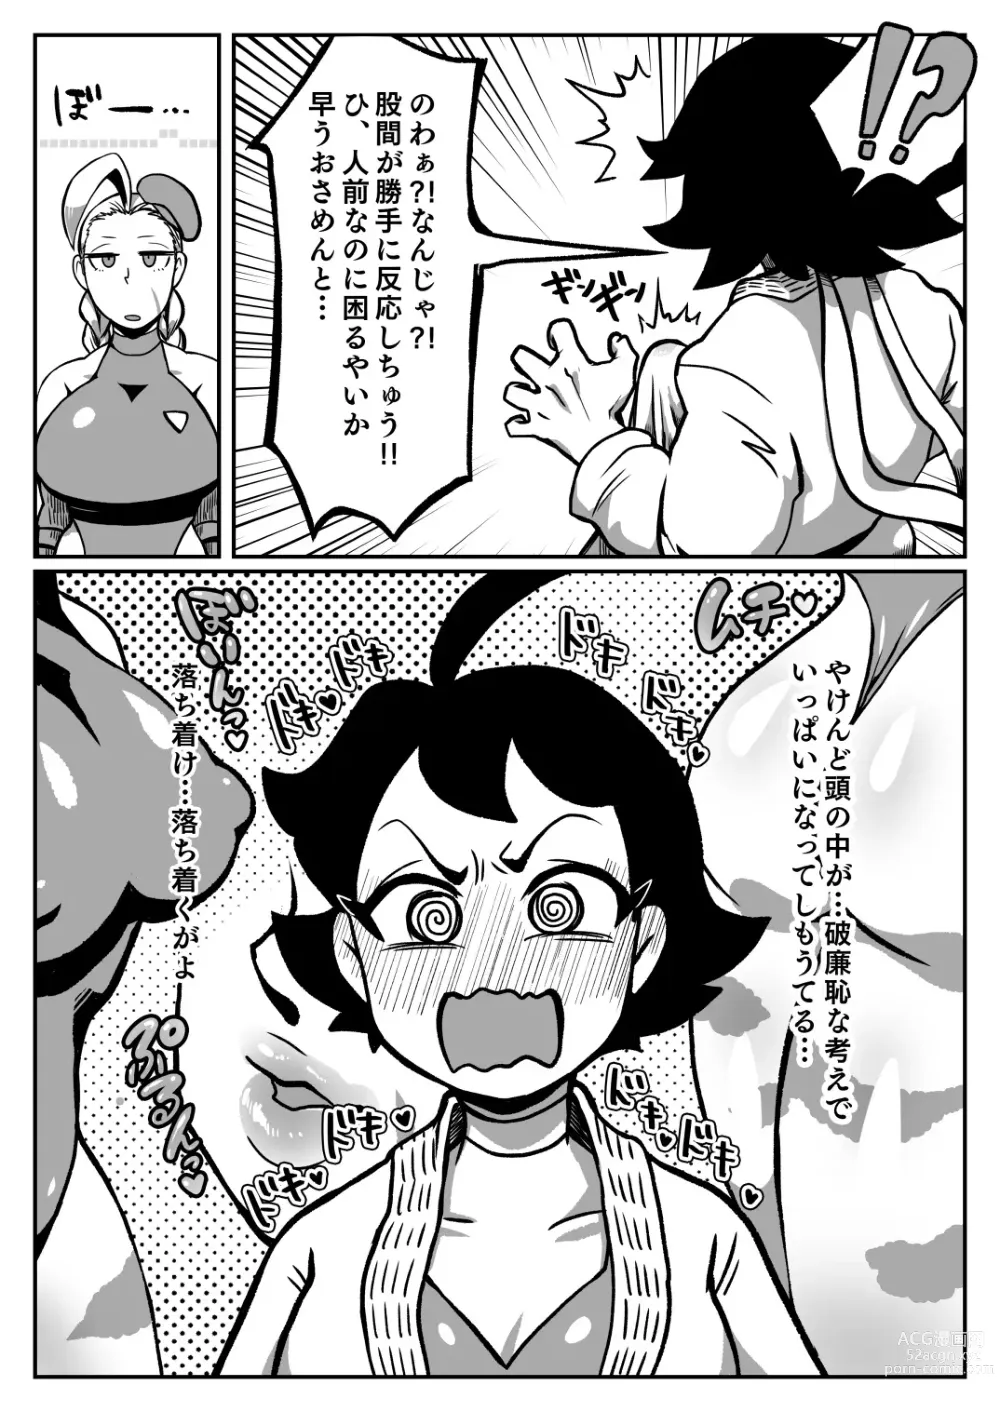 Page 7 of doujinshi Makommy